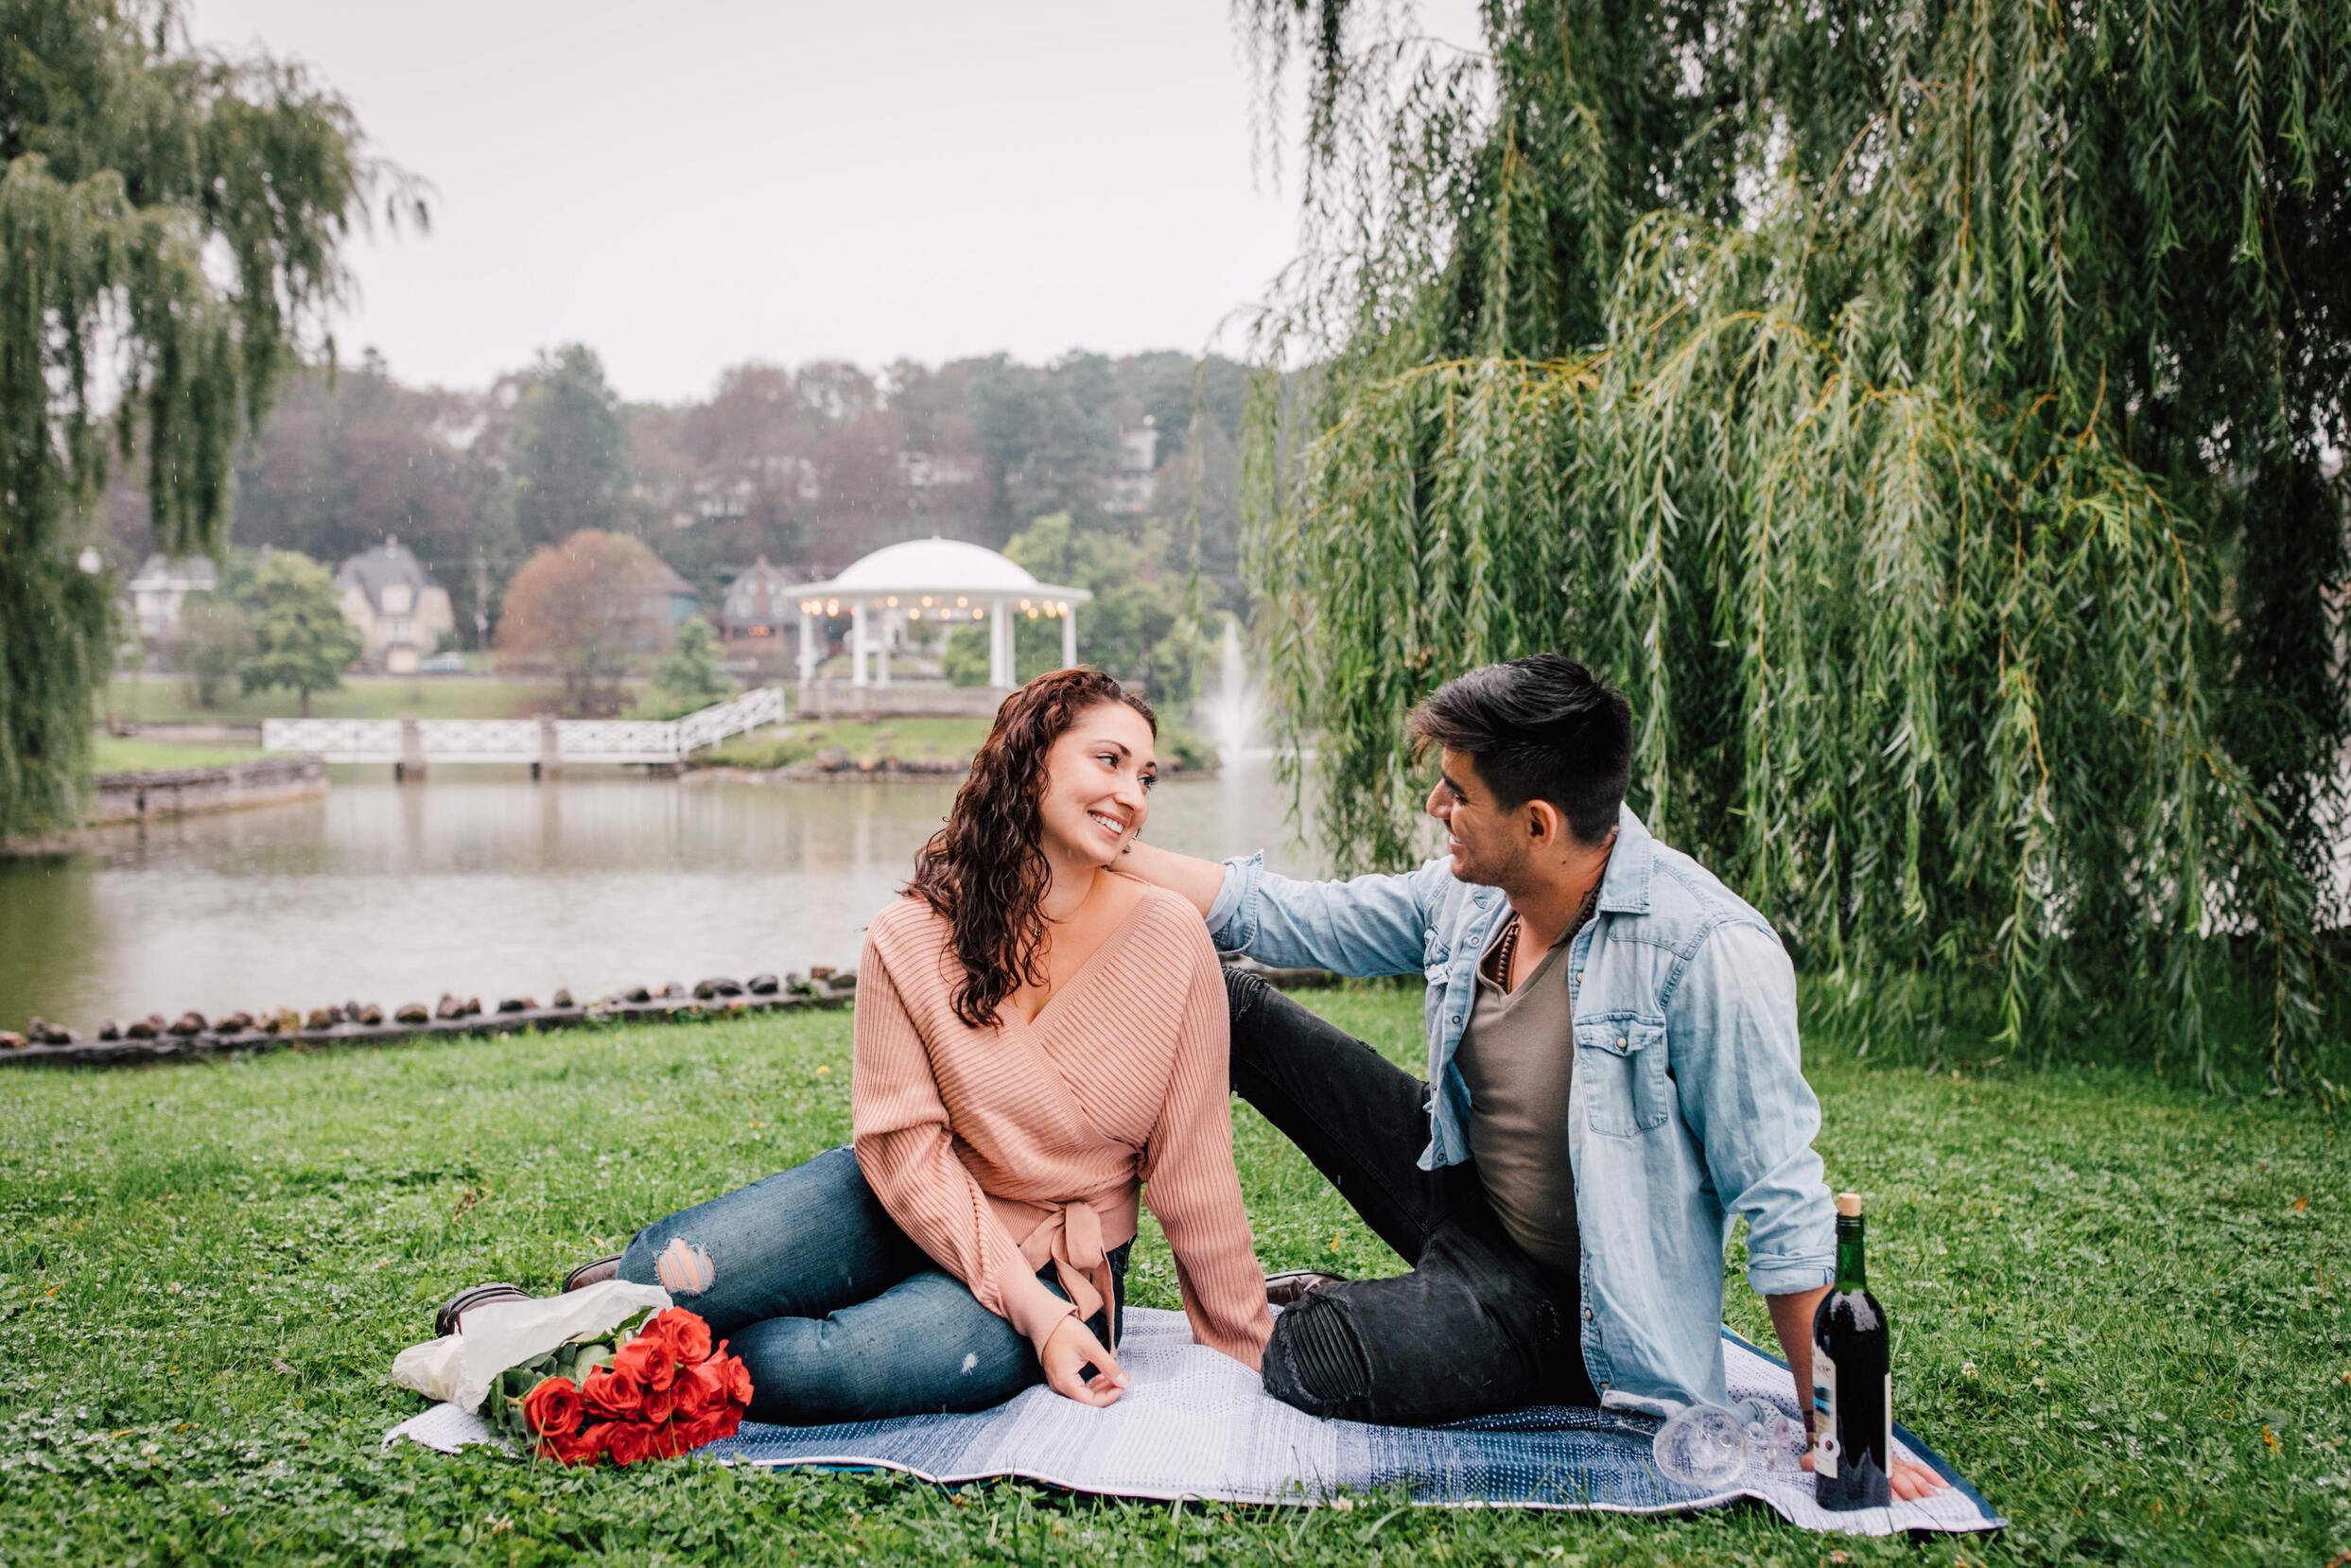  jessica and pablo smile at each other as they sit on a picnic blanket in a grassy area surrounded by the willow trees in upper onondaga park in front of a lake 